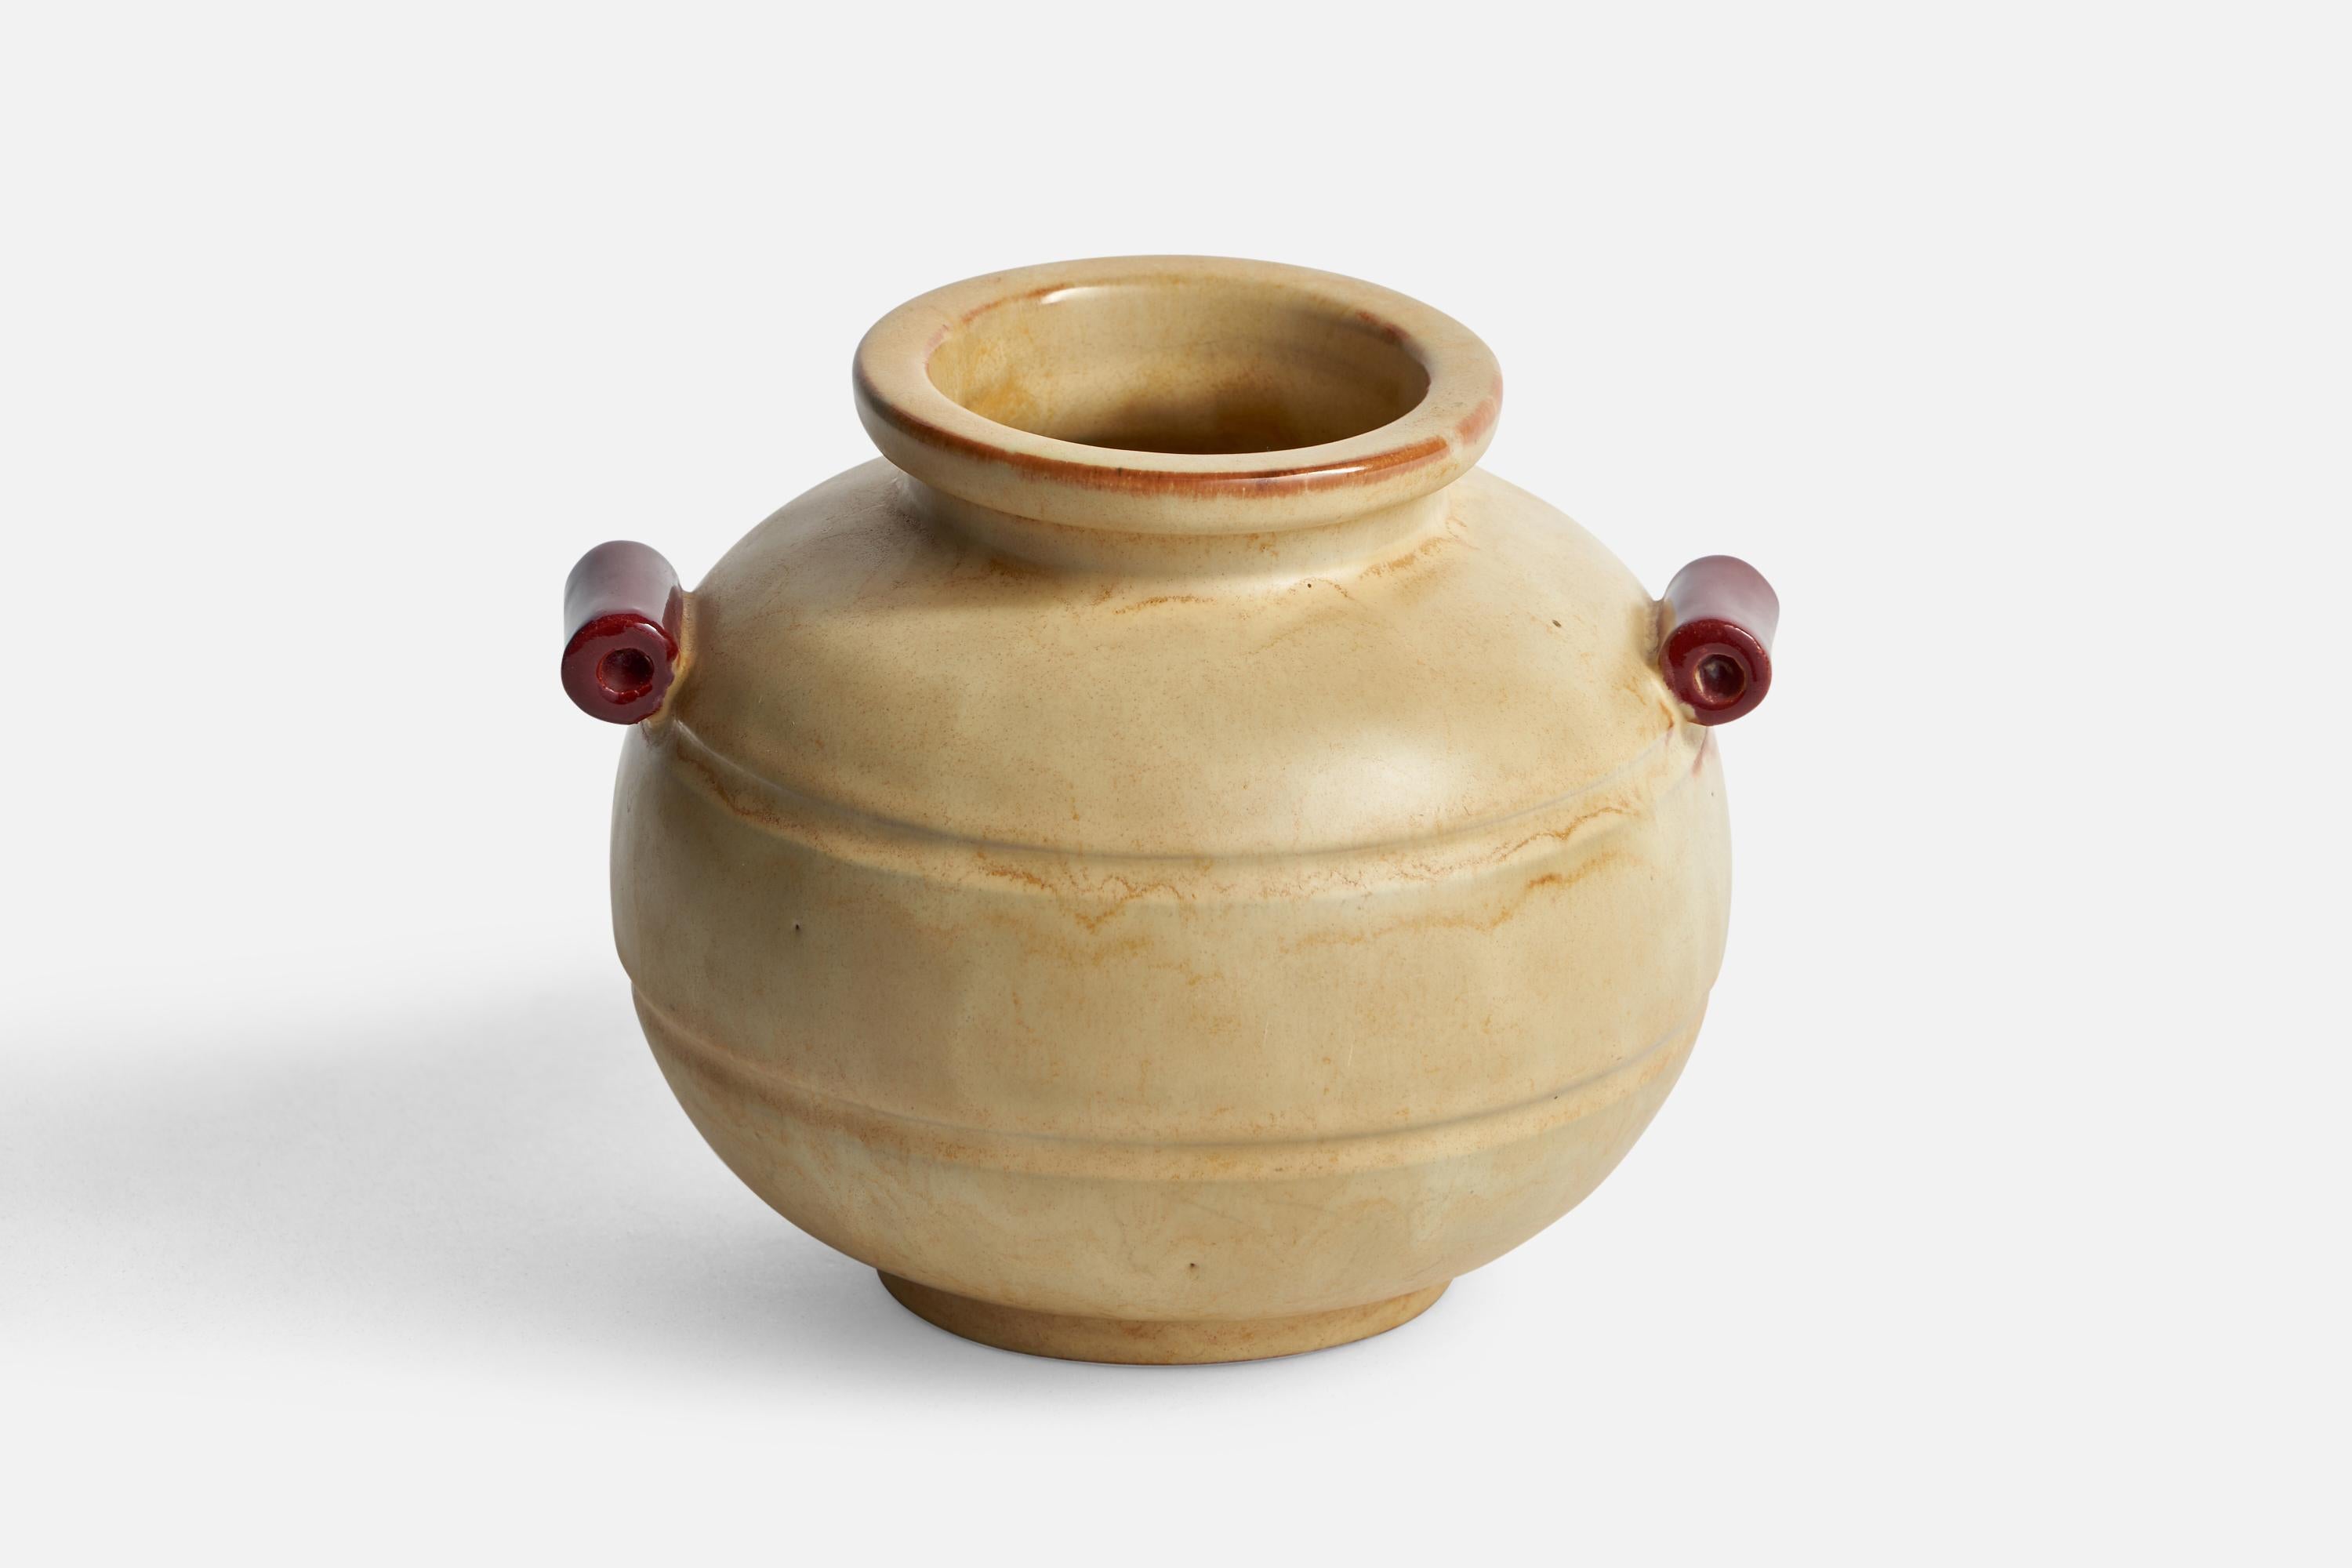 A beige and red-glazed earthenware vase designed and produced by Upsala Ekeby, Sweden, 1930s.